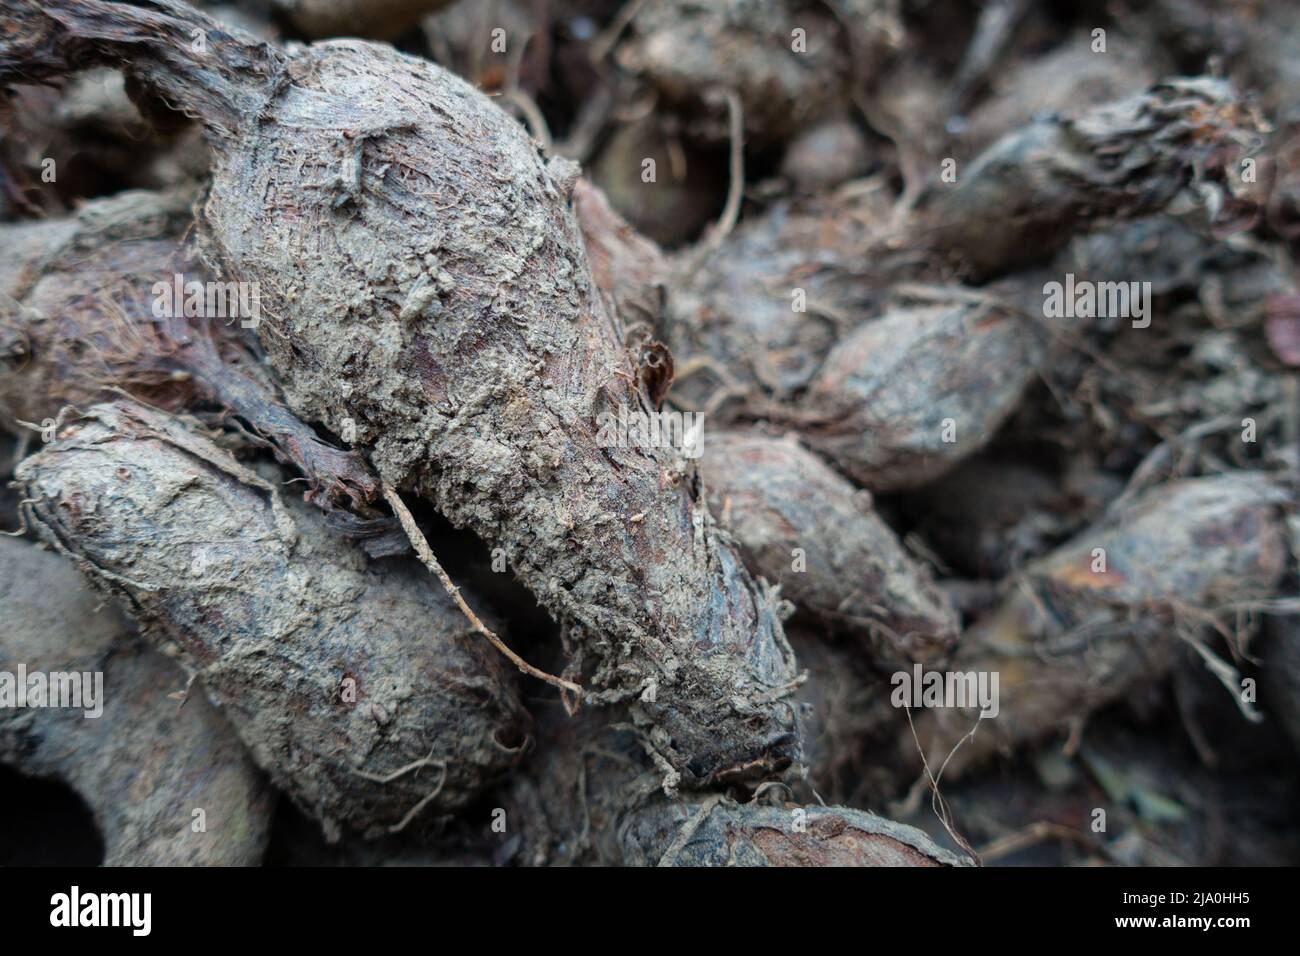 A closeup shot of taro plant roots, Colocasia esculenta. A tropical plant grown primarily for its edible corms. Uttarakhand India. Stock Photo